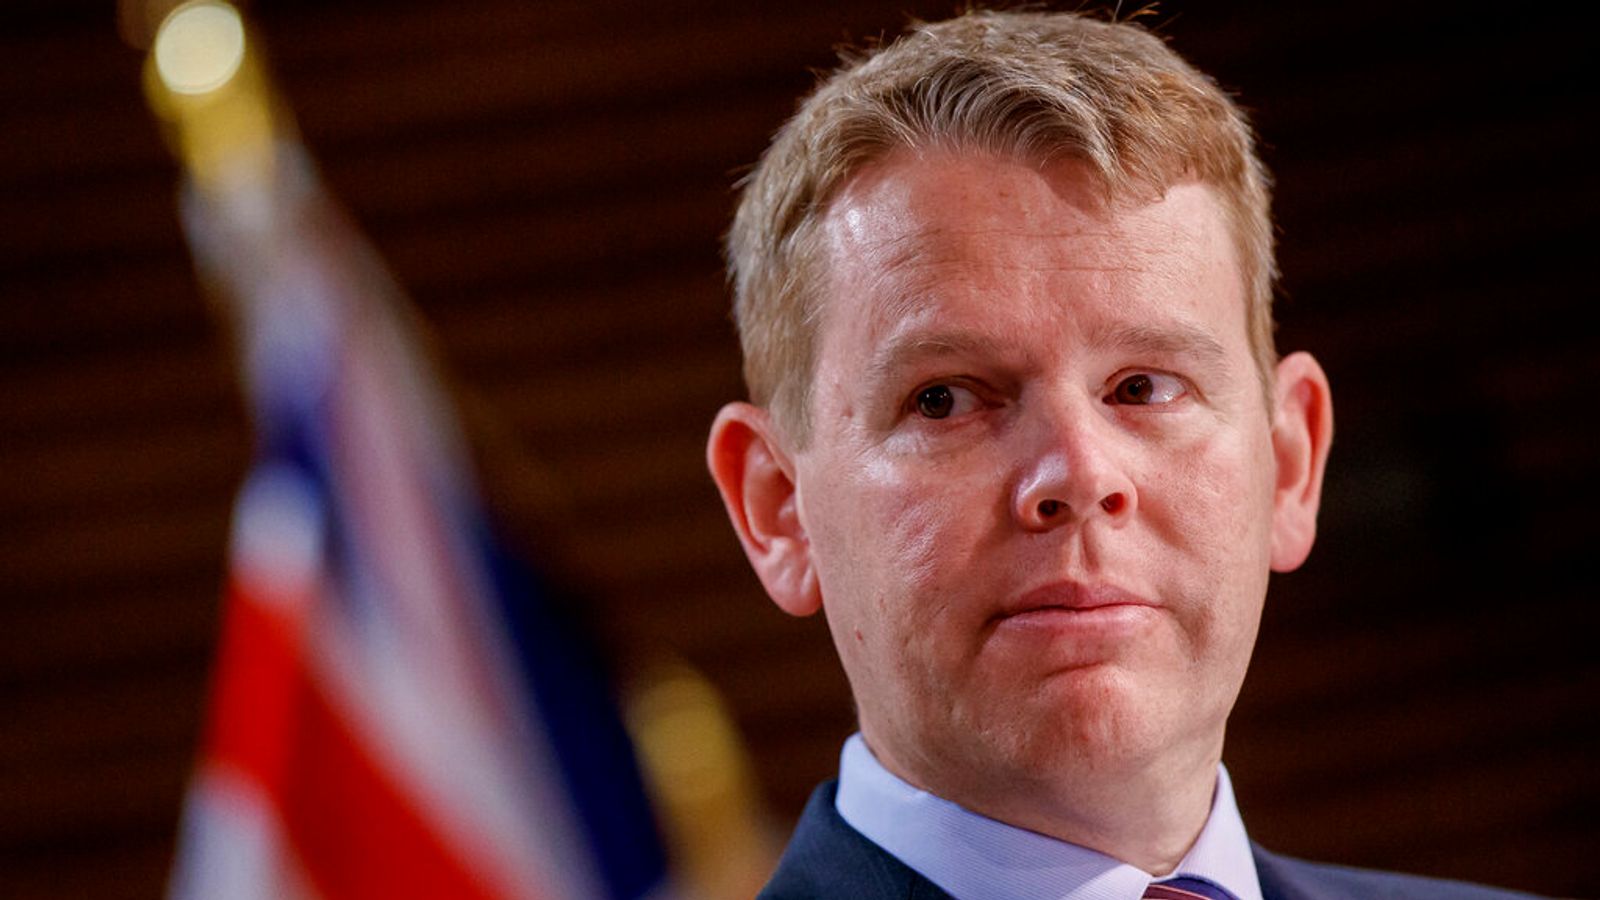 Education minister Chris Hipkins set to replace Jacinda Ardern as New Zealand prime minister | World News